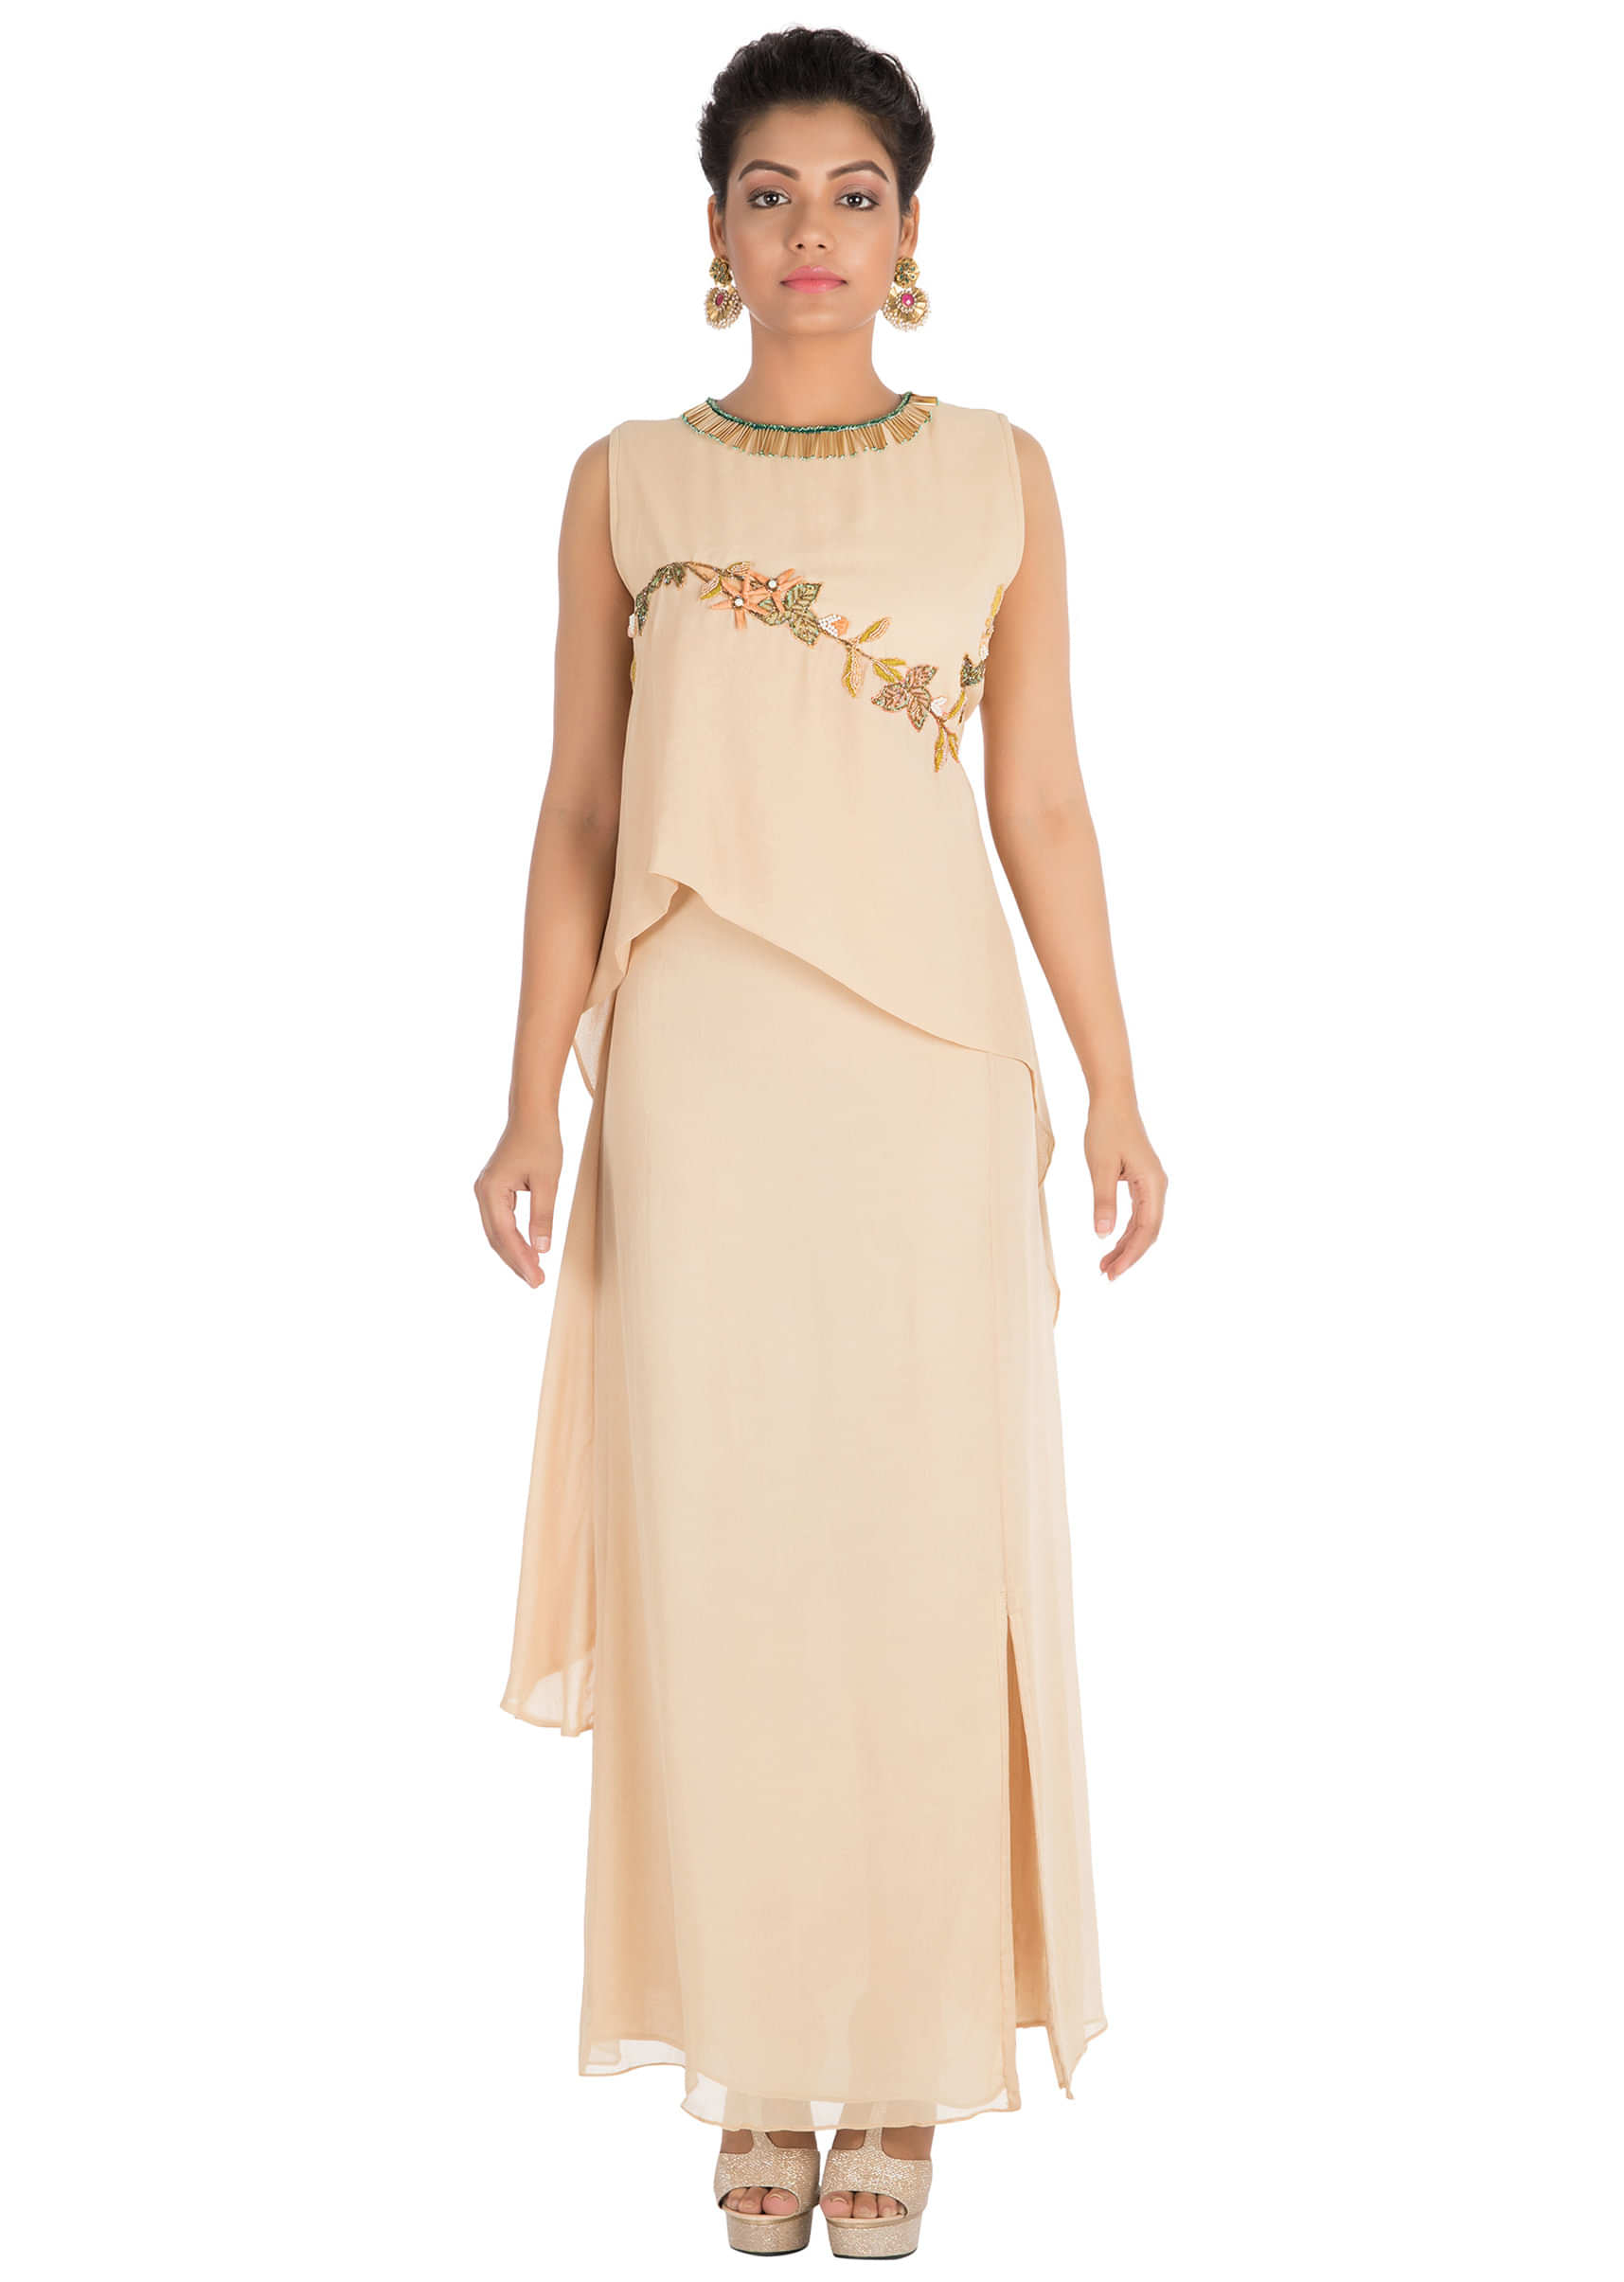 Hand embroidered Light beige double layered dress